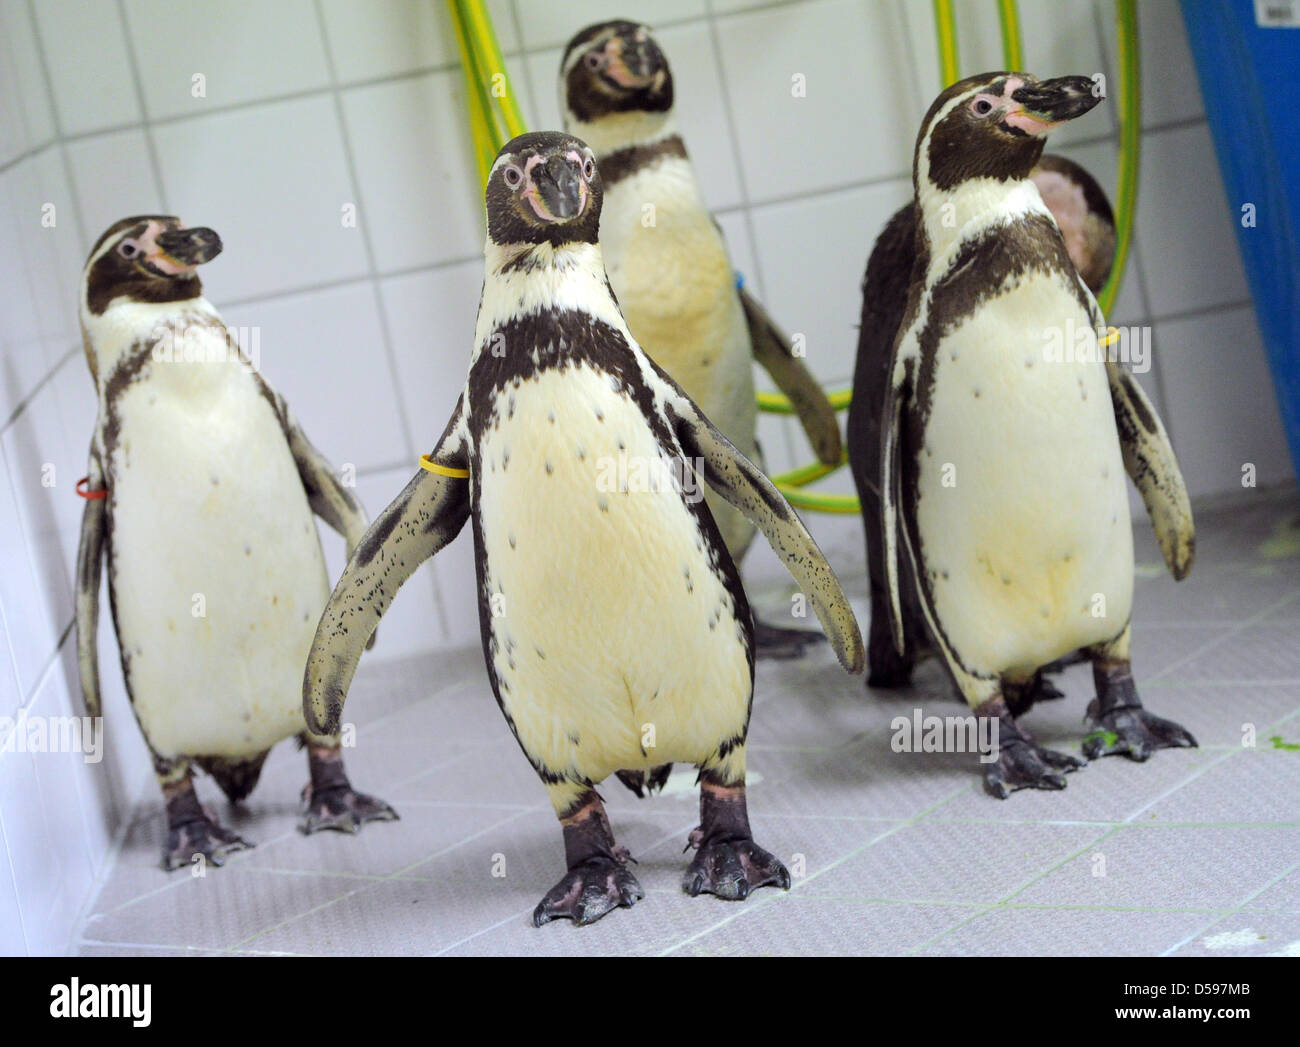 A penguin is fed with fish in the quarentine departent of Ozeaneum aquarium in Stralsund, Germany, 14 June 2010. Ozeaneum Stralsund's number of Humboldt penguins grew to nine, the new animals come from the zoos of Schwerin and Rostock and will remain in quarentine for four weeks. In July, they are to move into their new home on the roof of Ozeaneum Stralsund where a 120,000-litres  Stock Photo